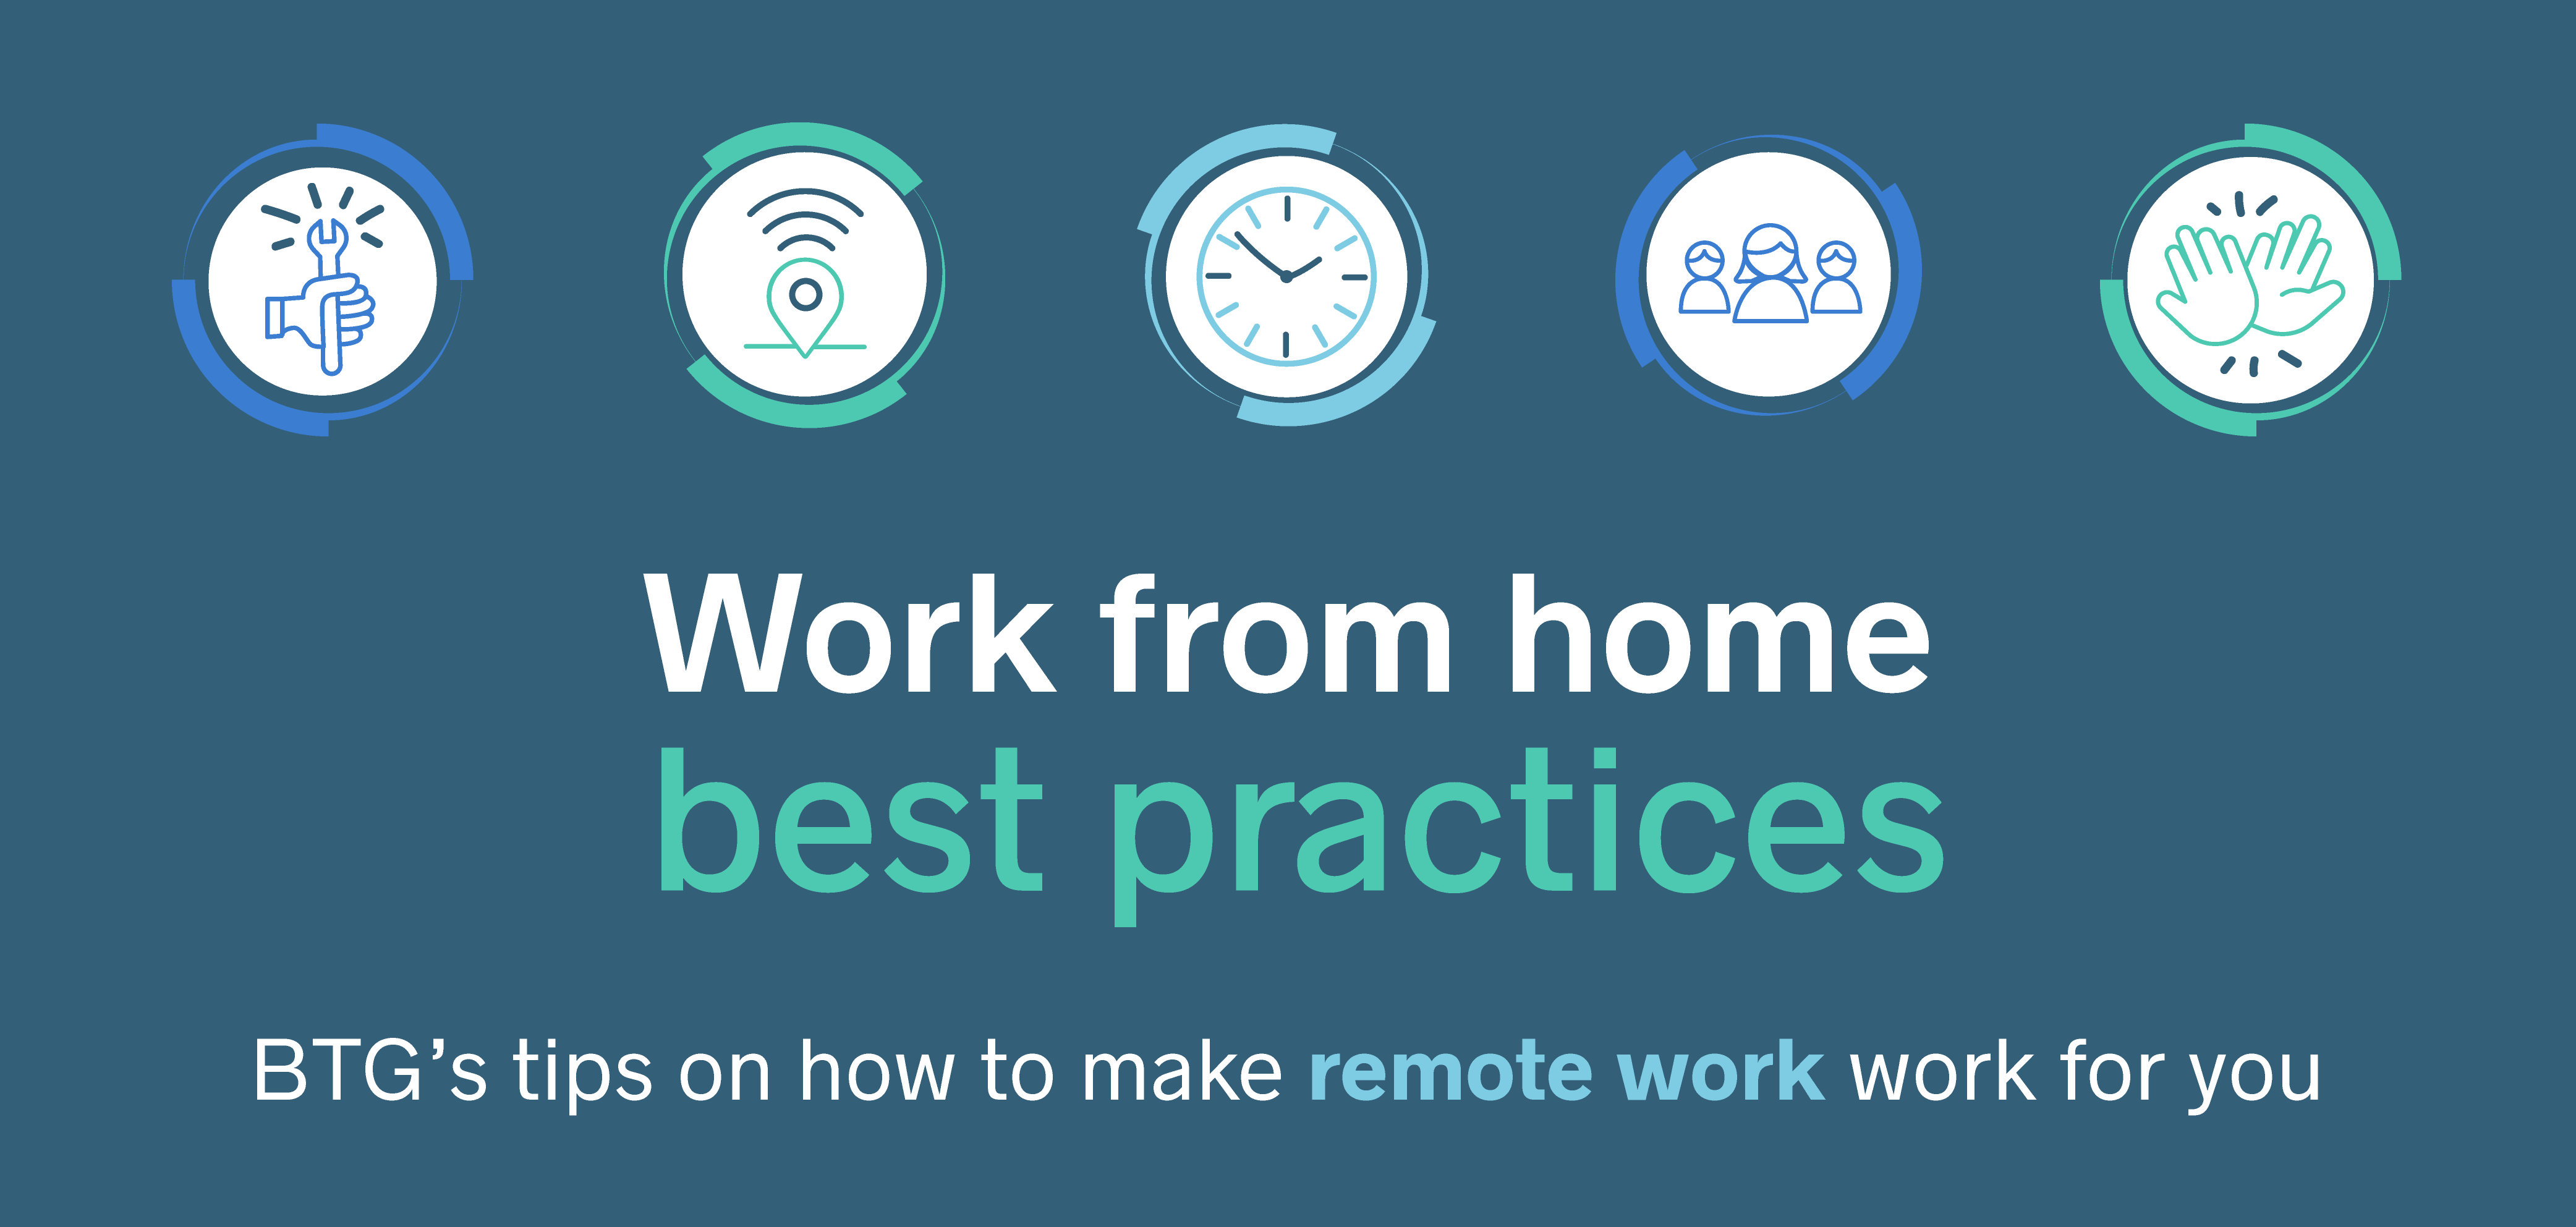 working remotely tips